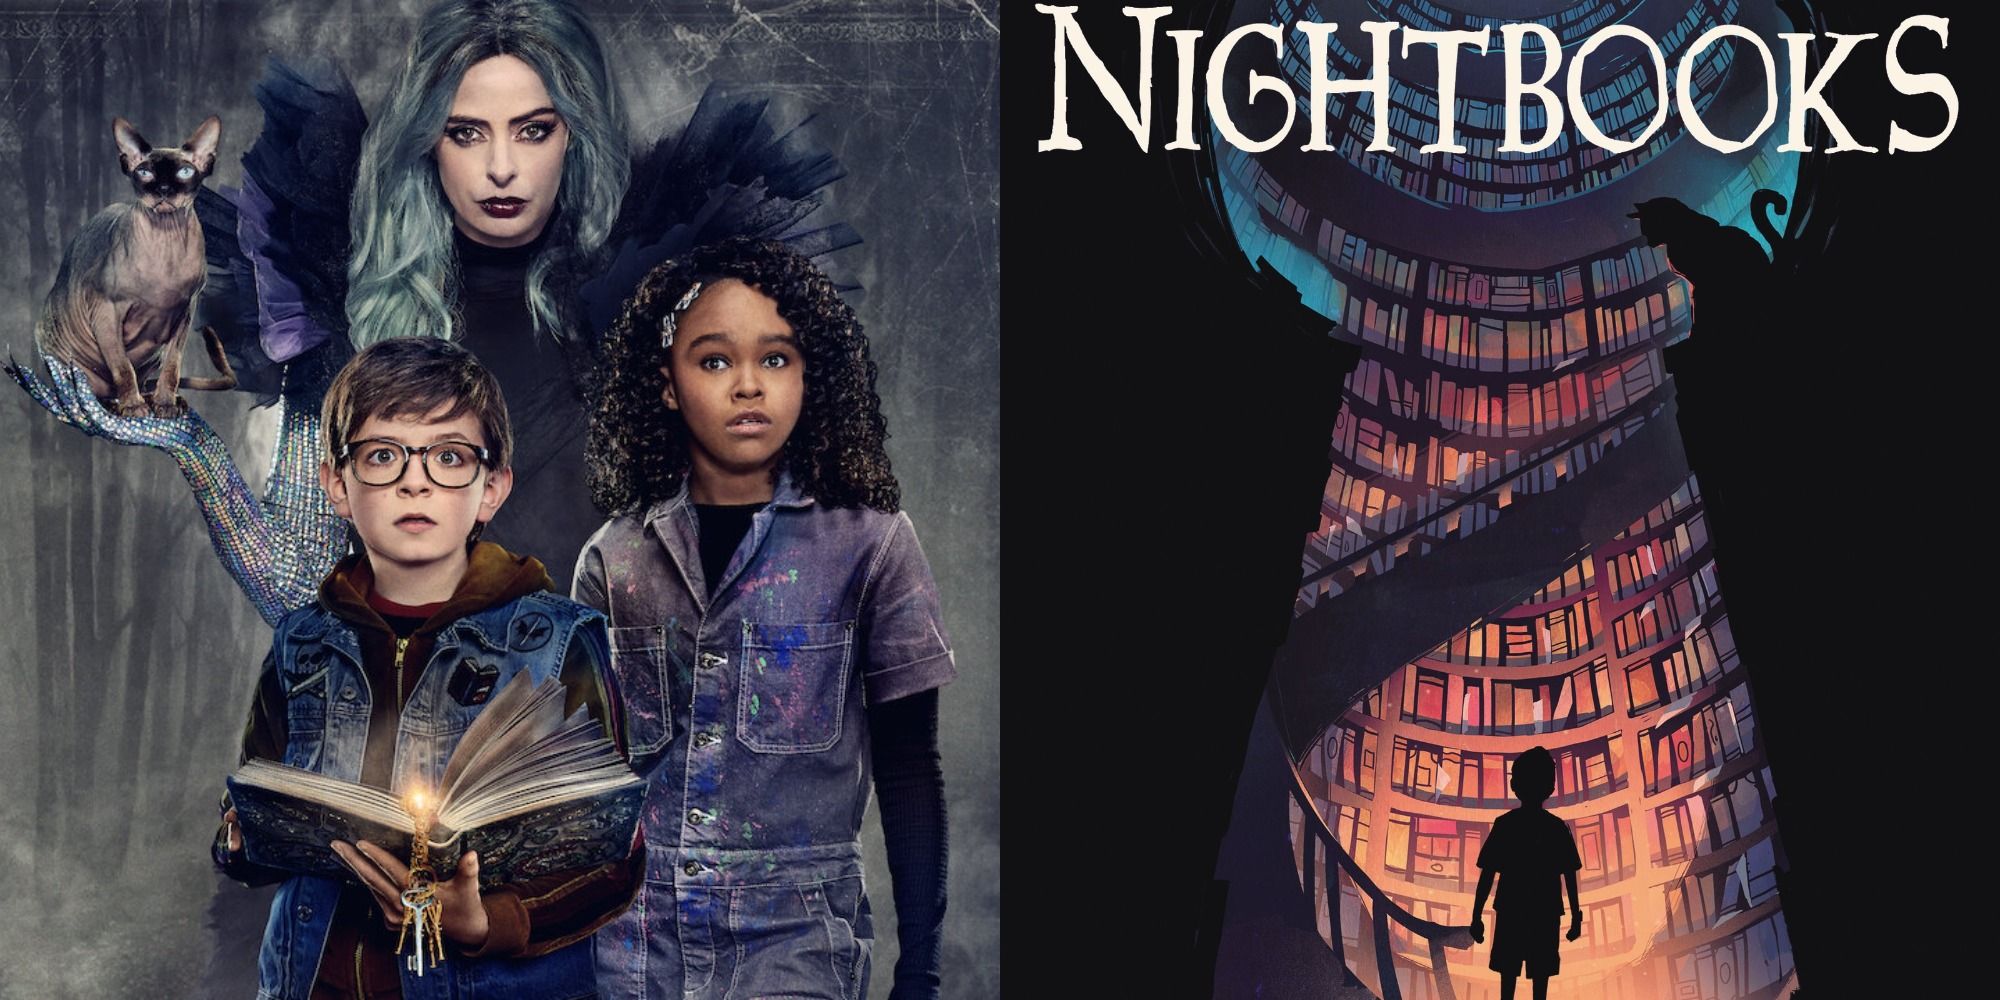 Split image showing the main characters from Nightbook and the book cover